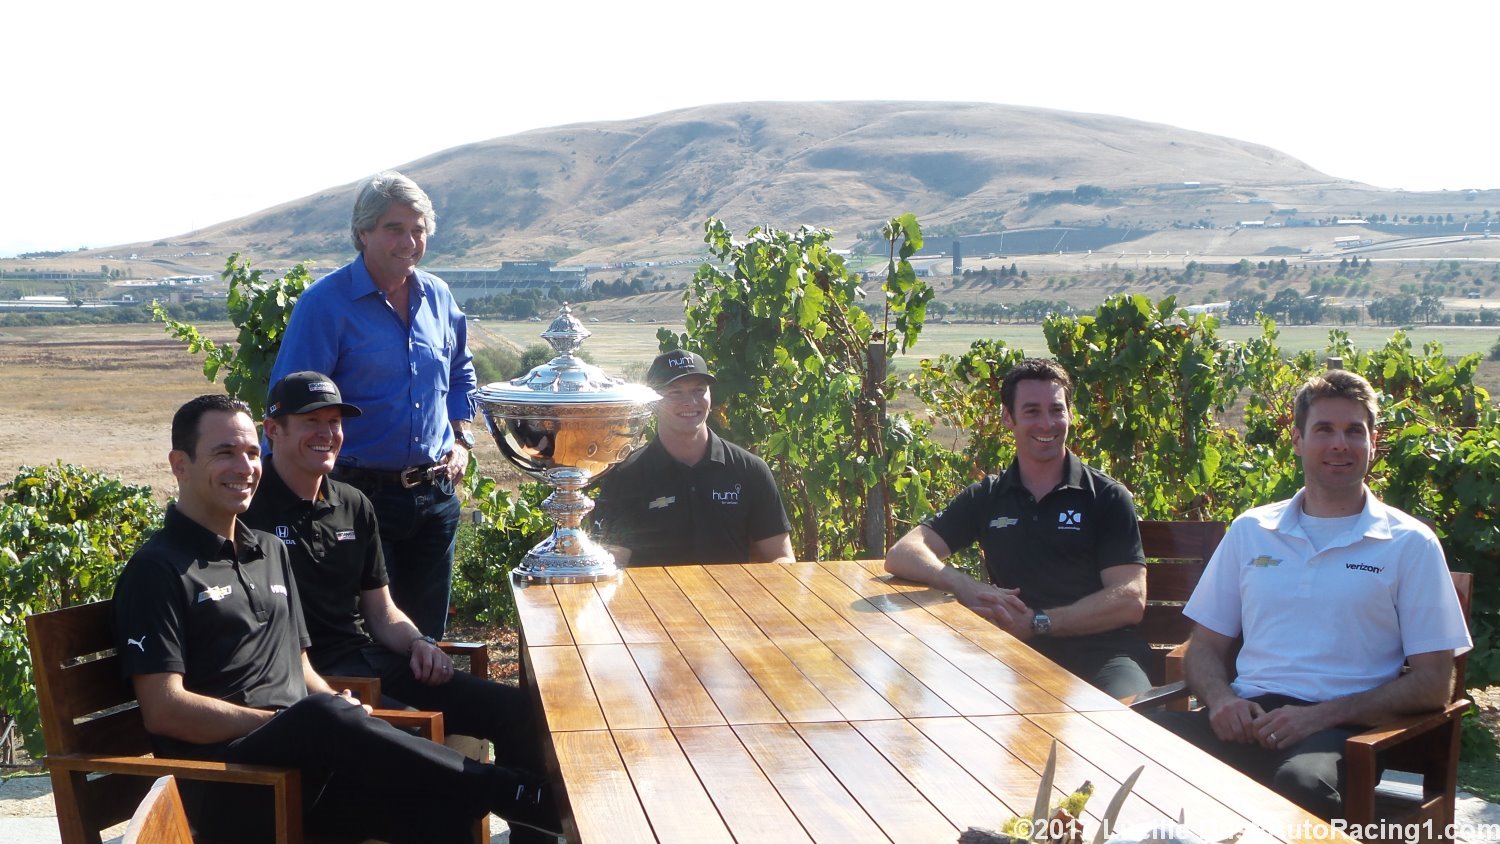 AR1.com recently visites Vasser's winery with the Six IndyCar drivers in contention for the 2017 title